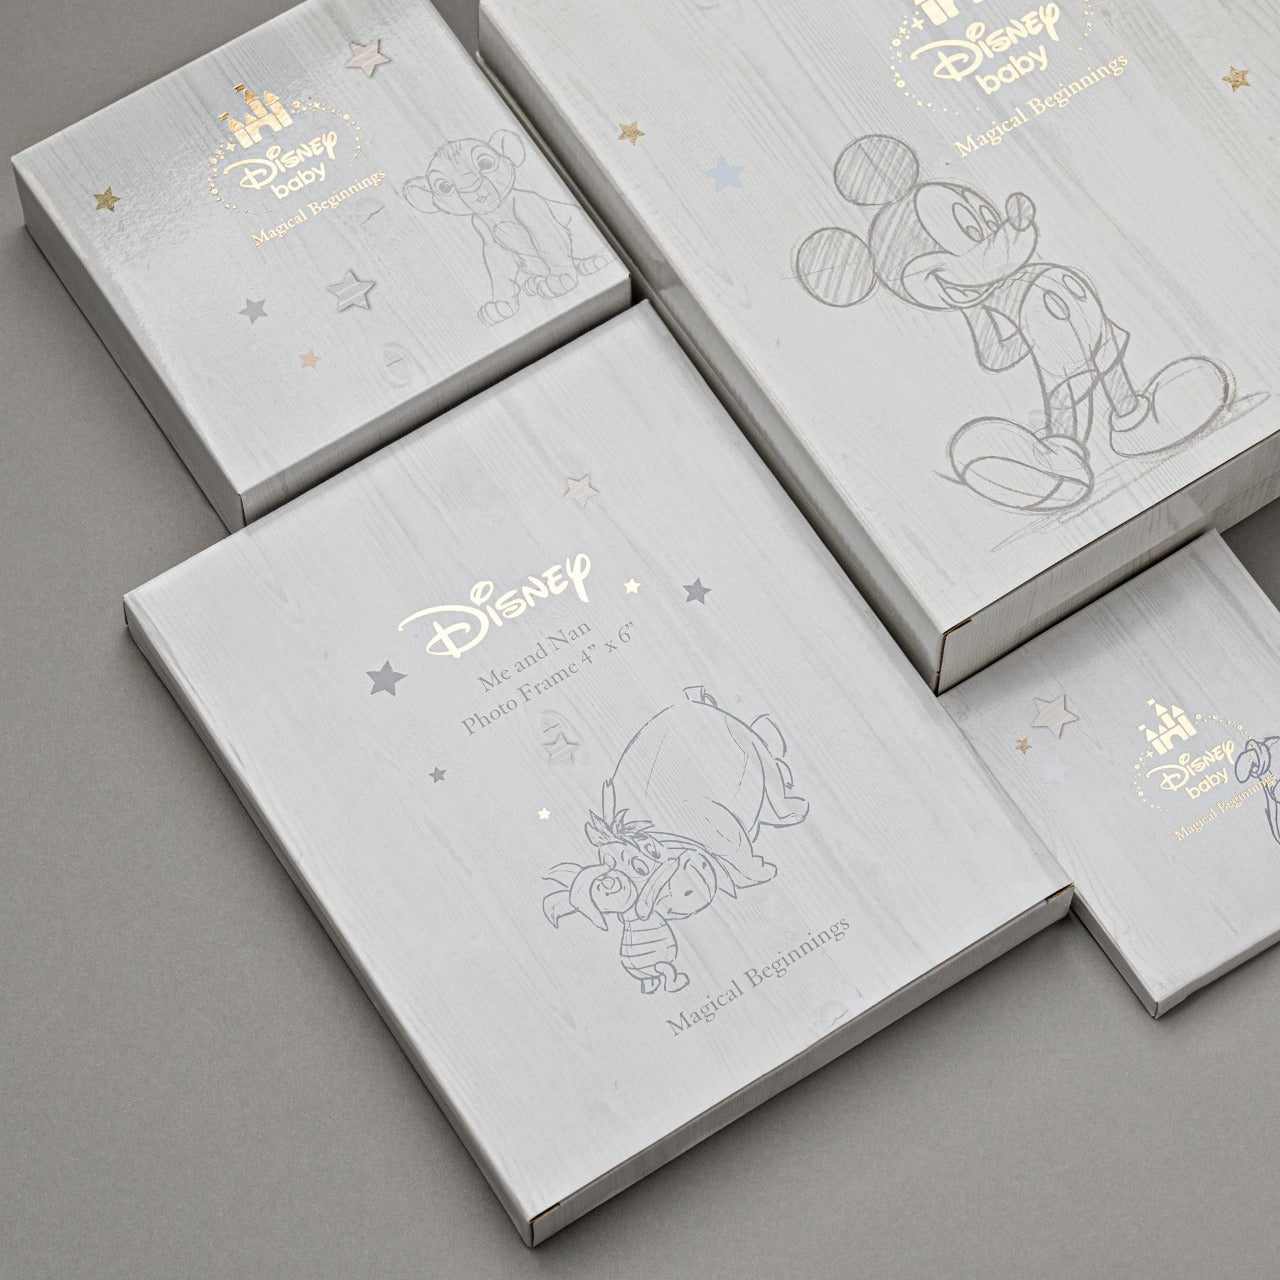 Disney Magical Beginnings Photo Album 4" x 6" Mickey Mouse  Add a touch of magic to your every day with this Magical Beginnings Photo Album.  As part of our range of classic Disney illustration giftware, this photo album displays a beautiful depiction of the classic Disney character, Mickey Mouse, 'Handsome Little Boy' gold glitter lettering, space for fifty 4" x 6" photos, personalisable title page and a blue bow closure.